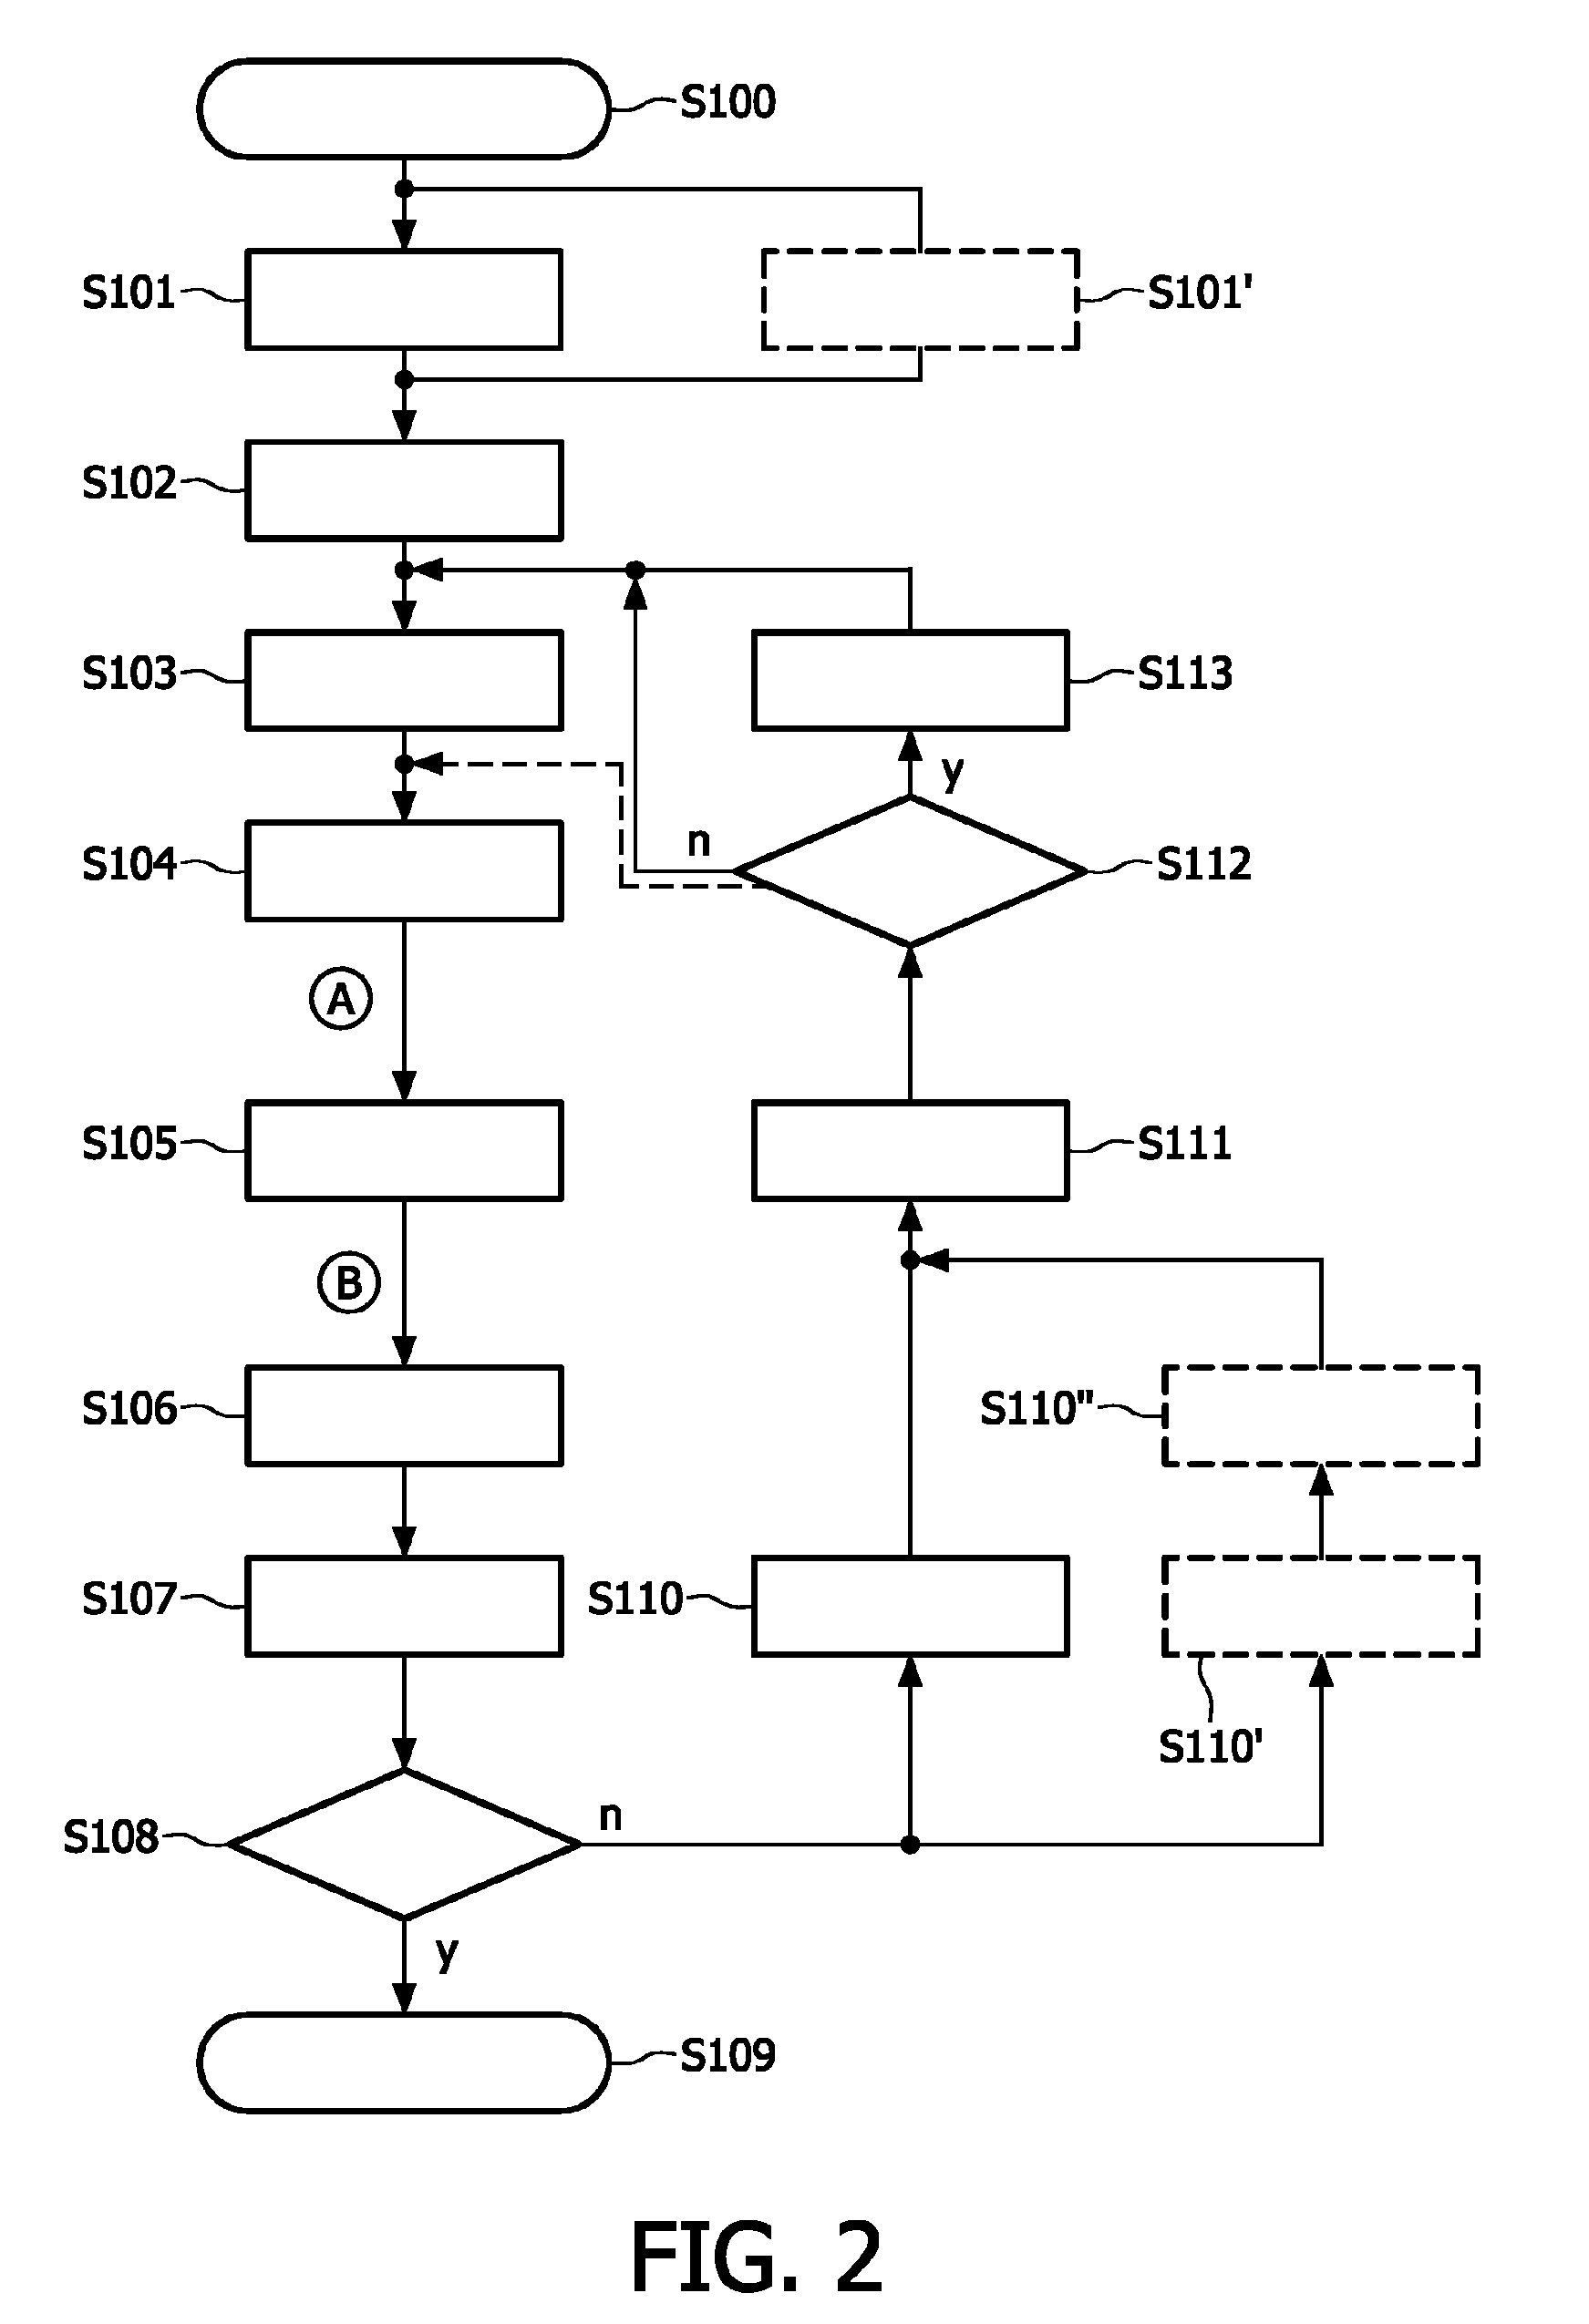 System and method for acquiring magnetic resonance imaging (MRI) data